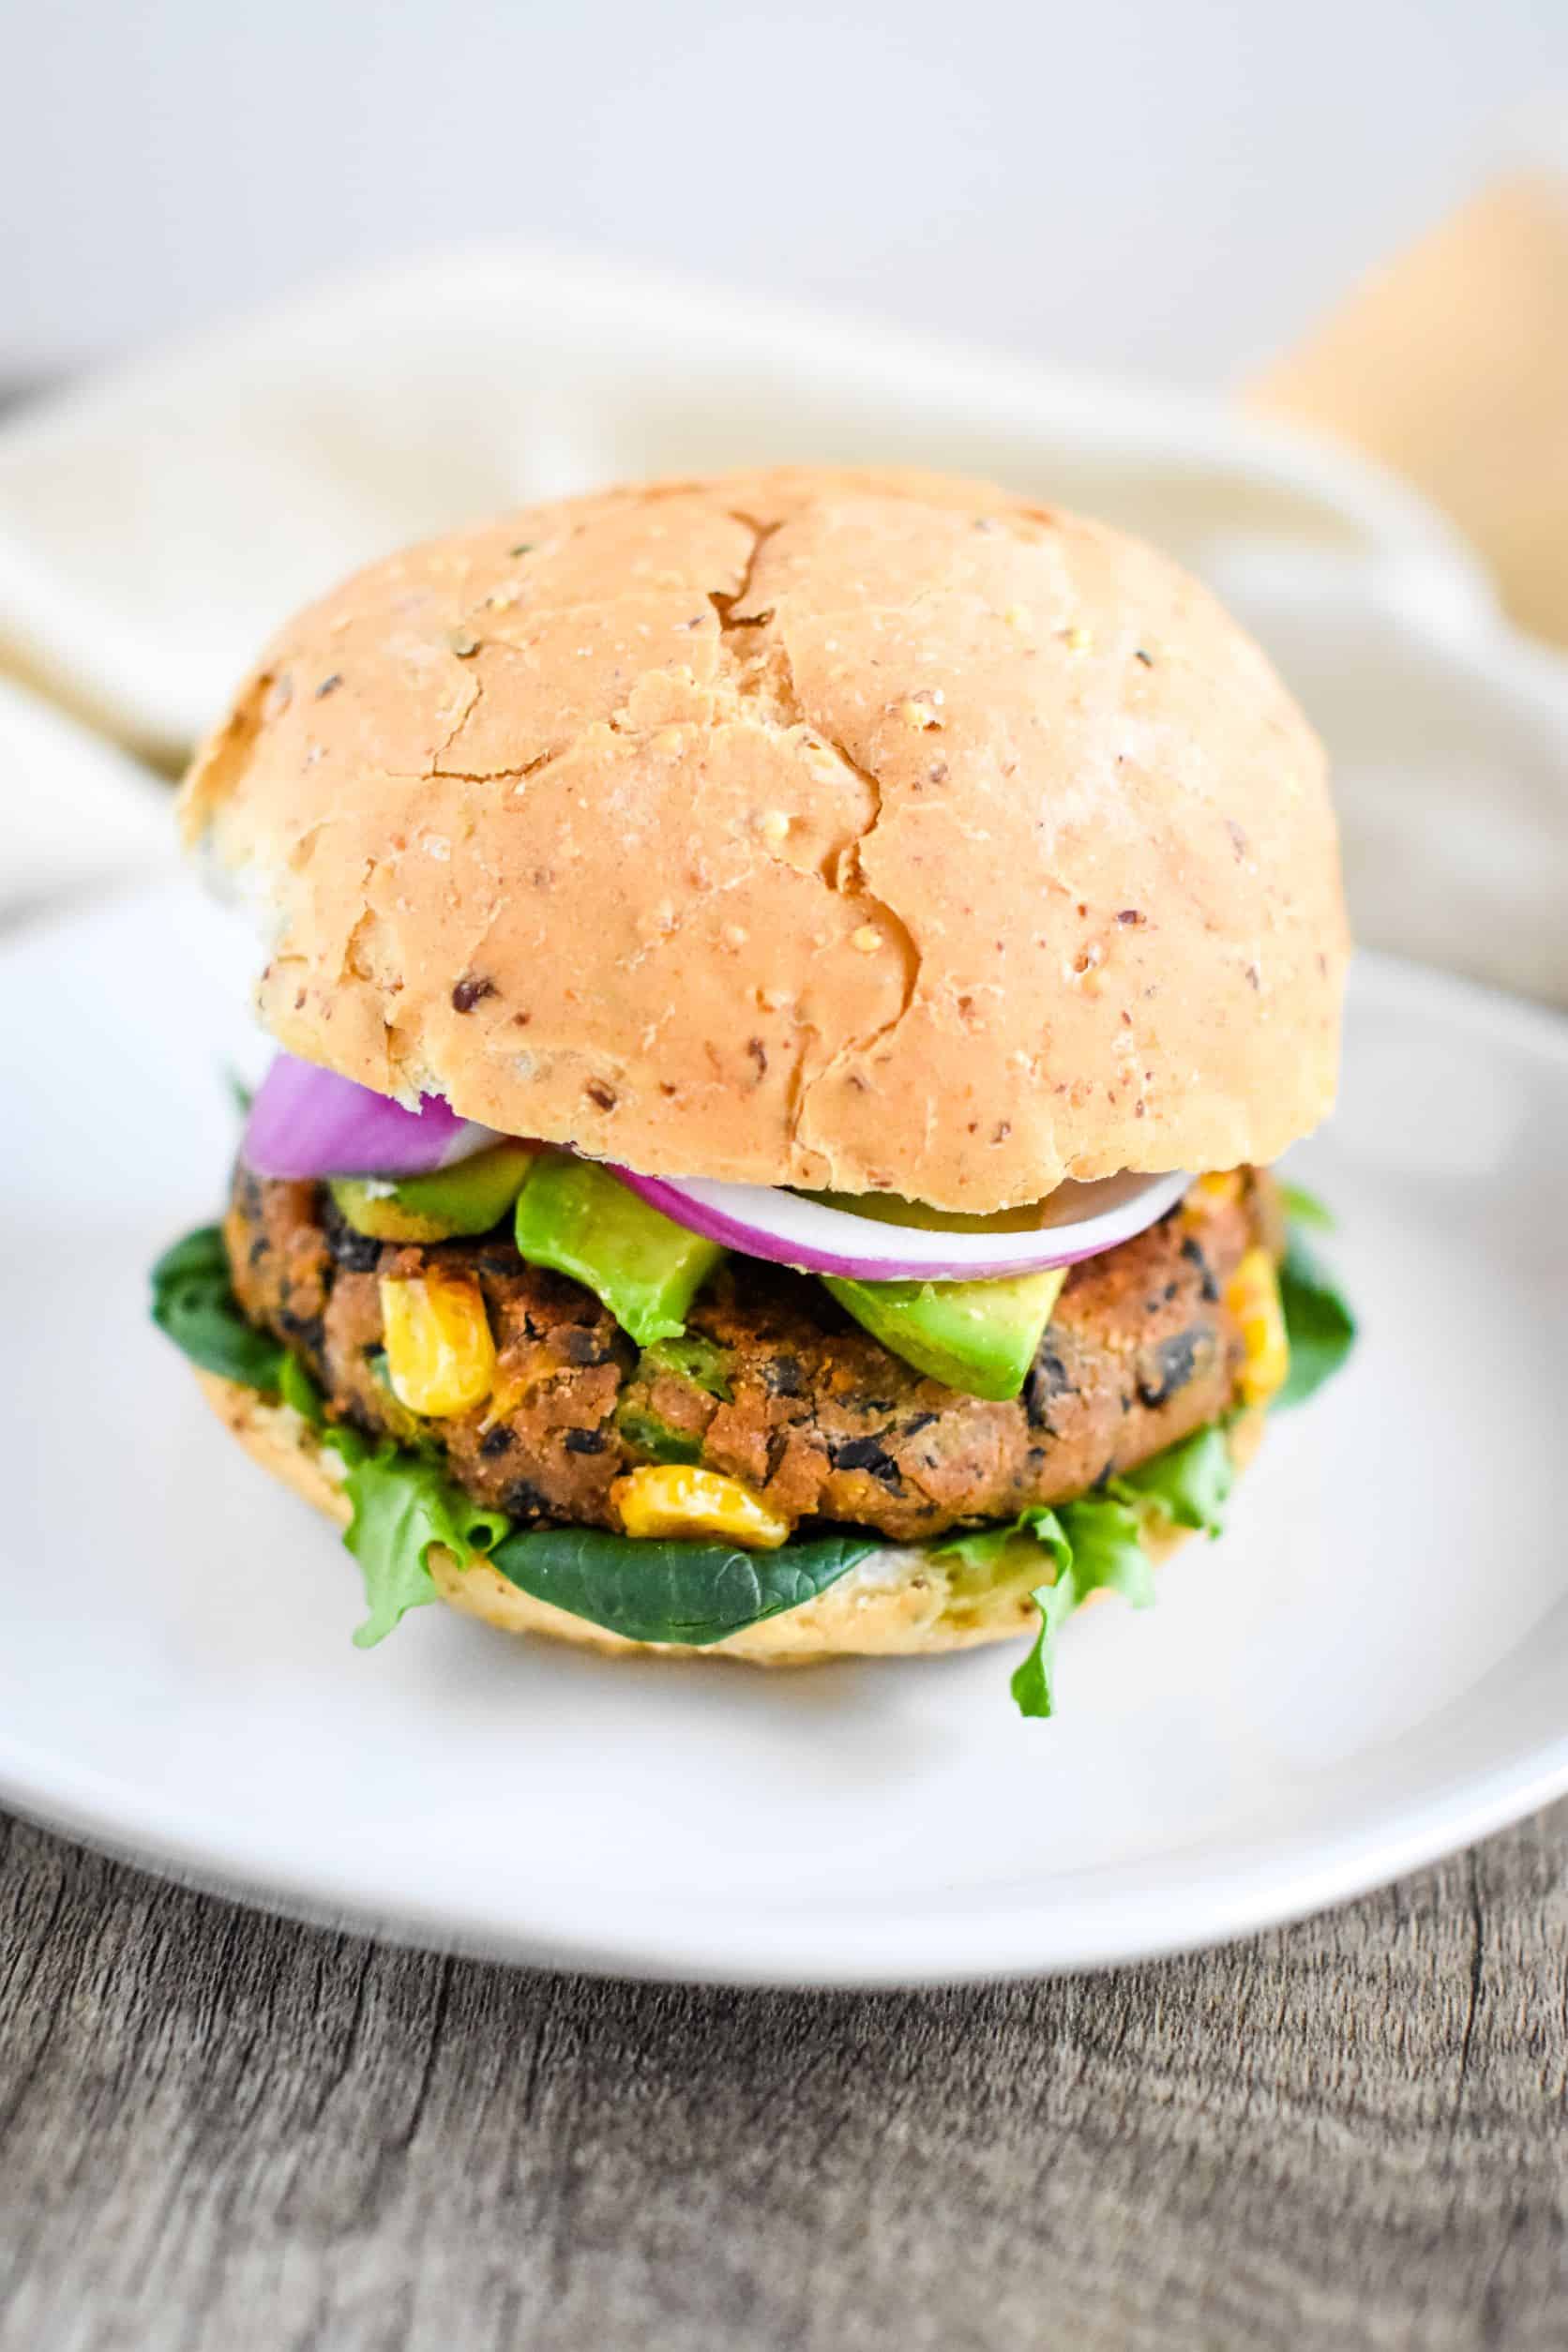 veggie burger with avocado and red onion on a white plate.
